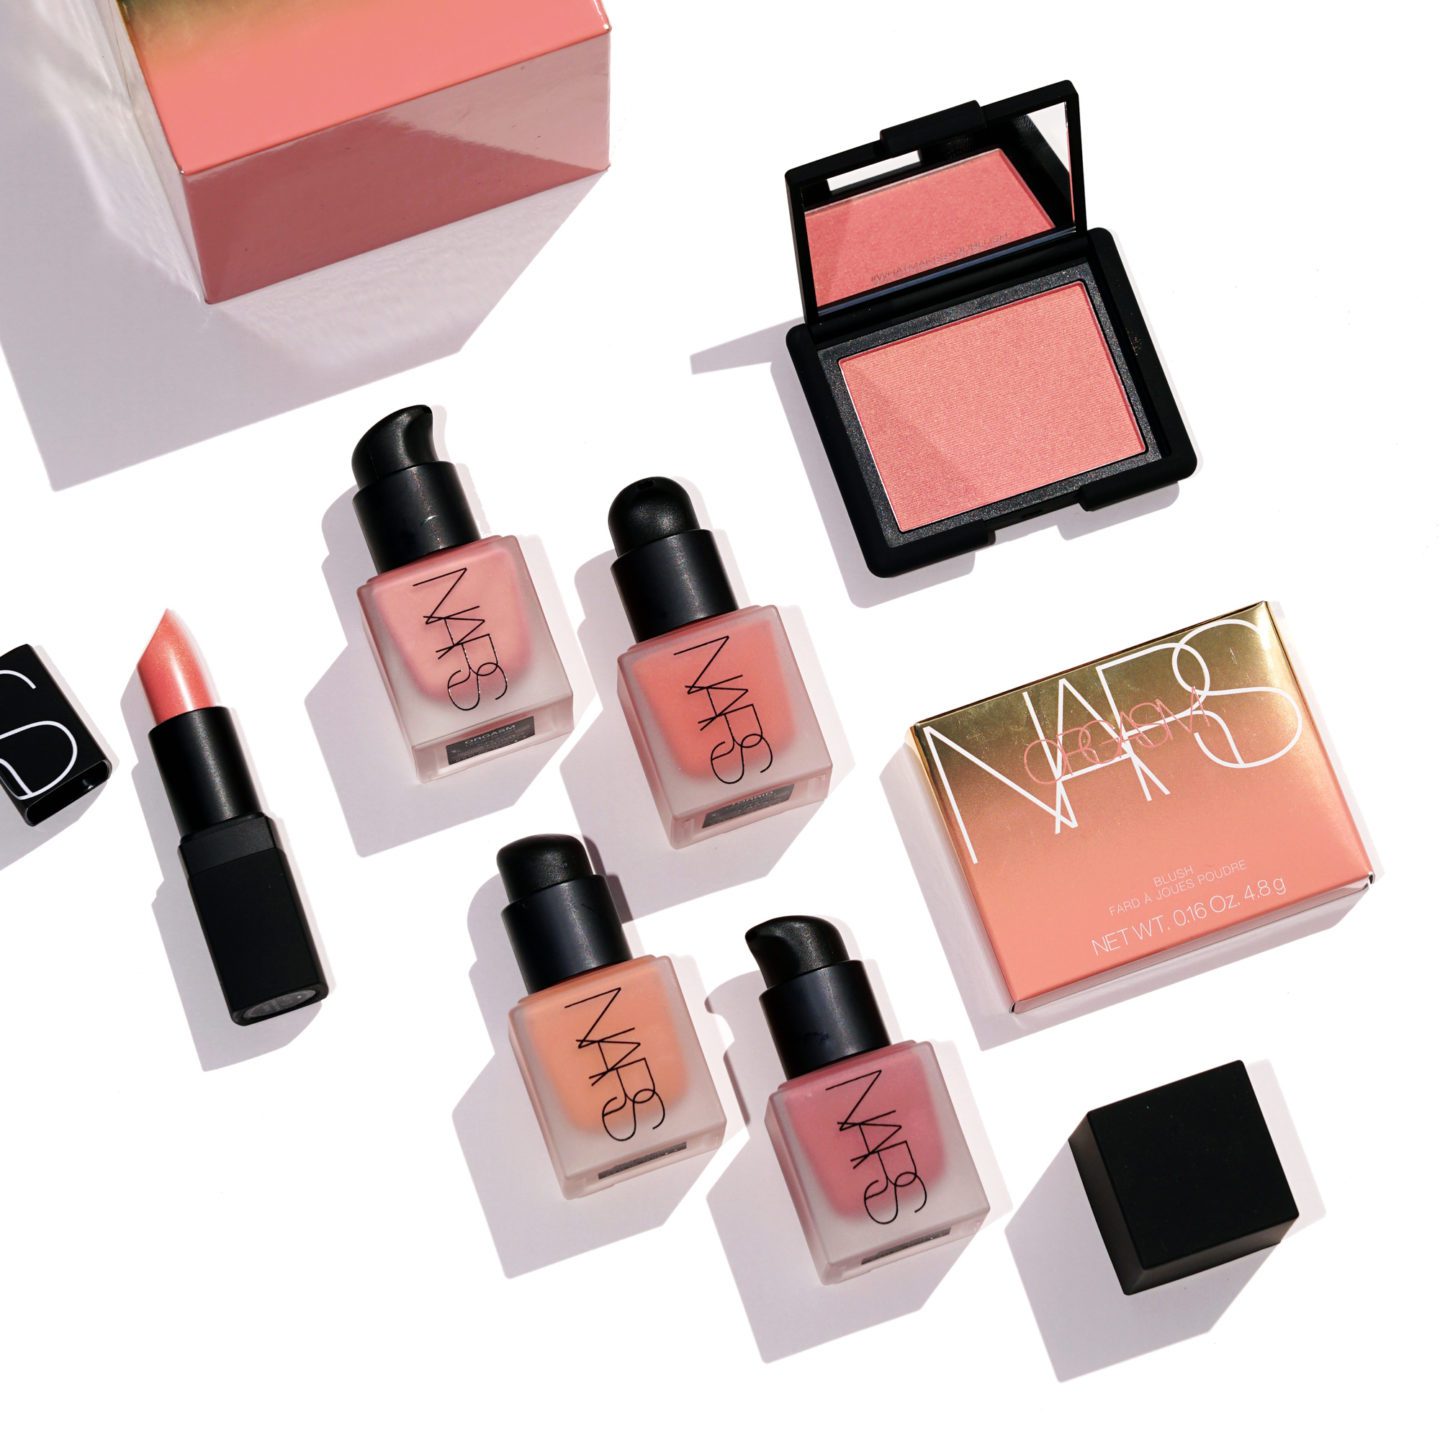 NARS Liquid Blush and Orgasm Collection Review | The Beauty Look Book